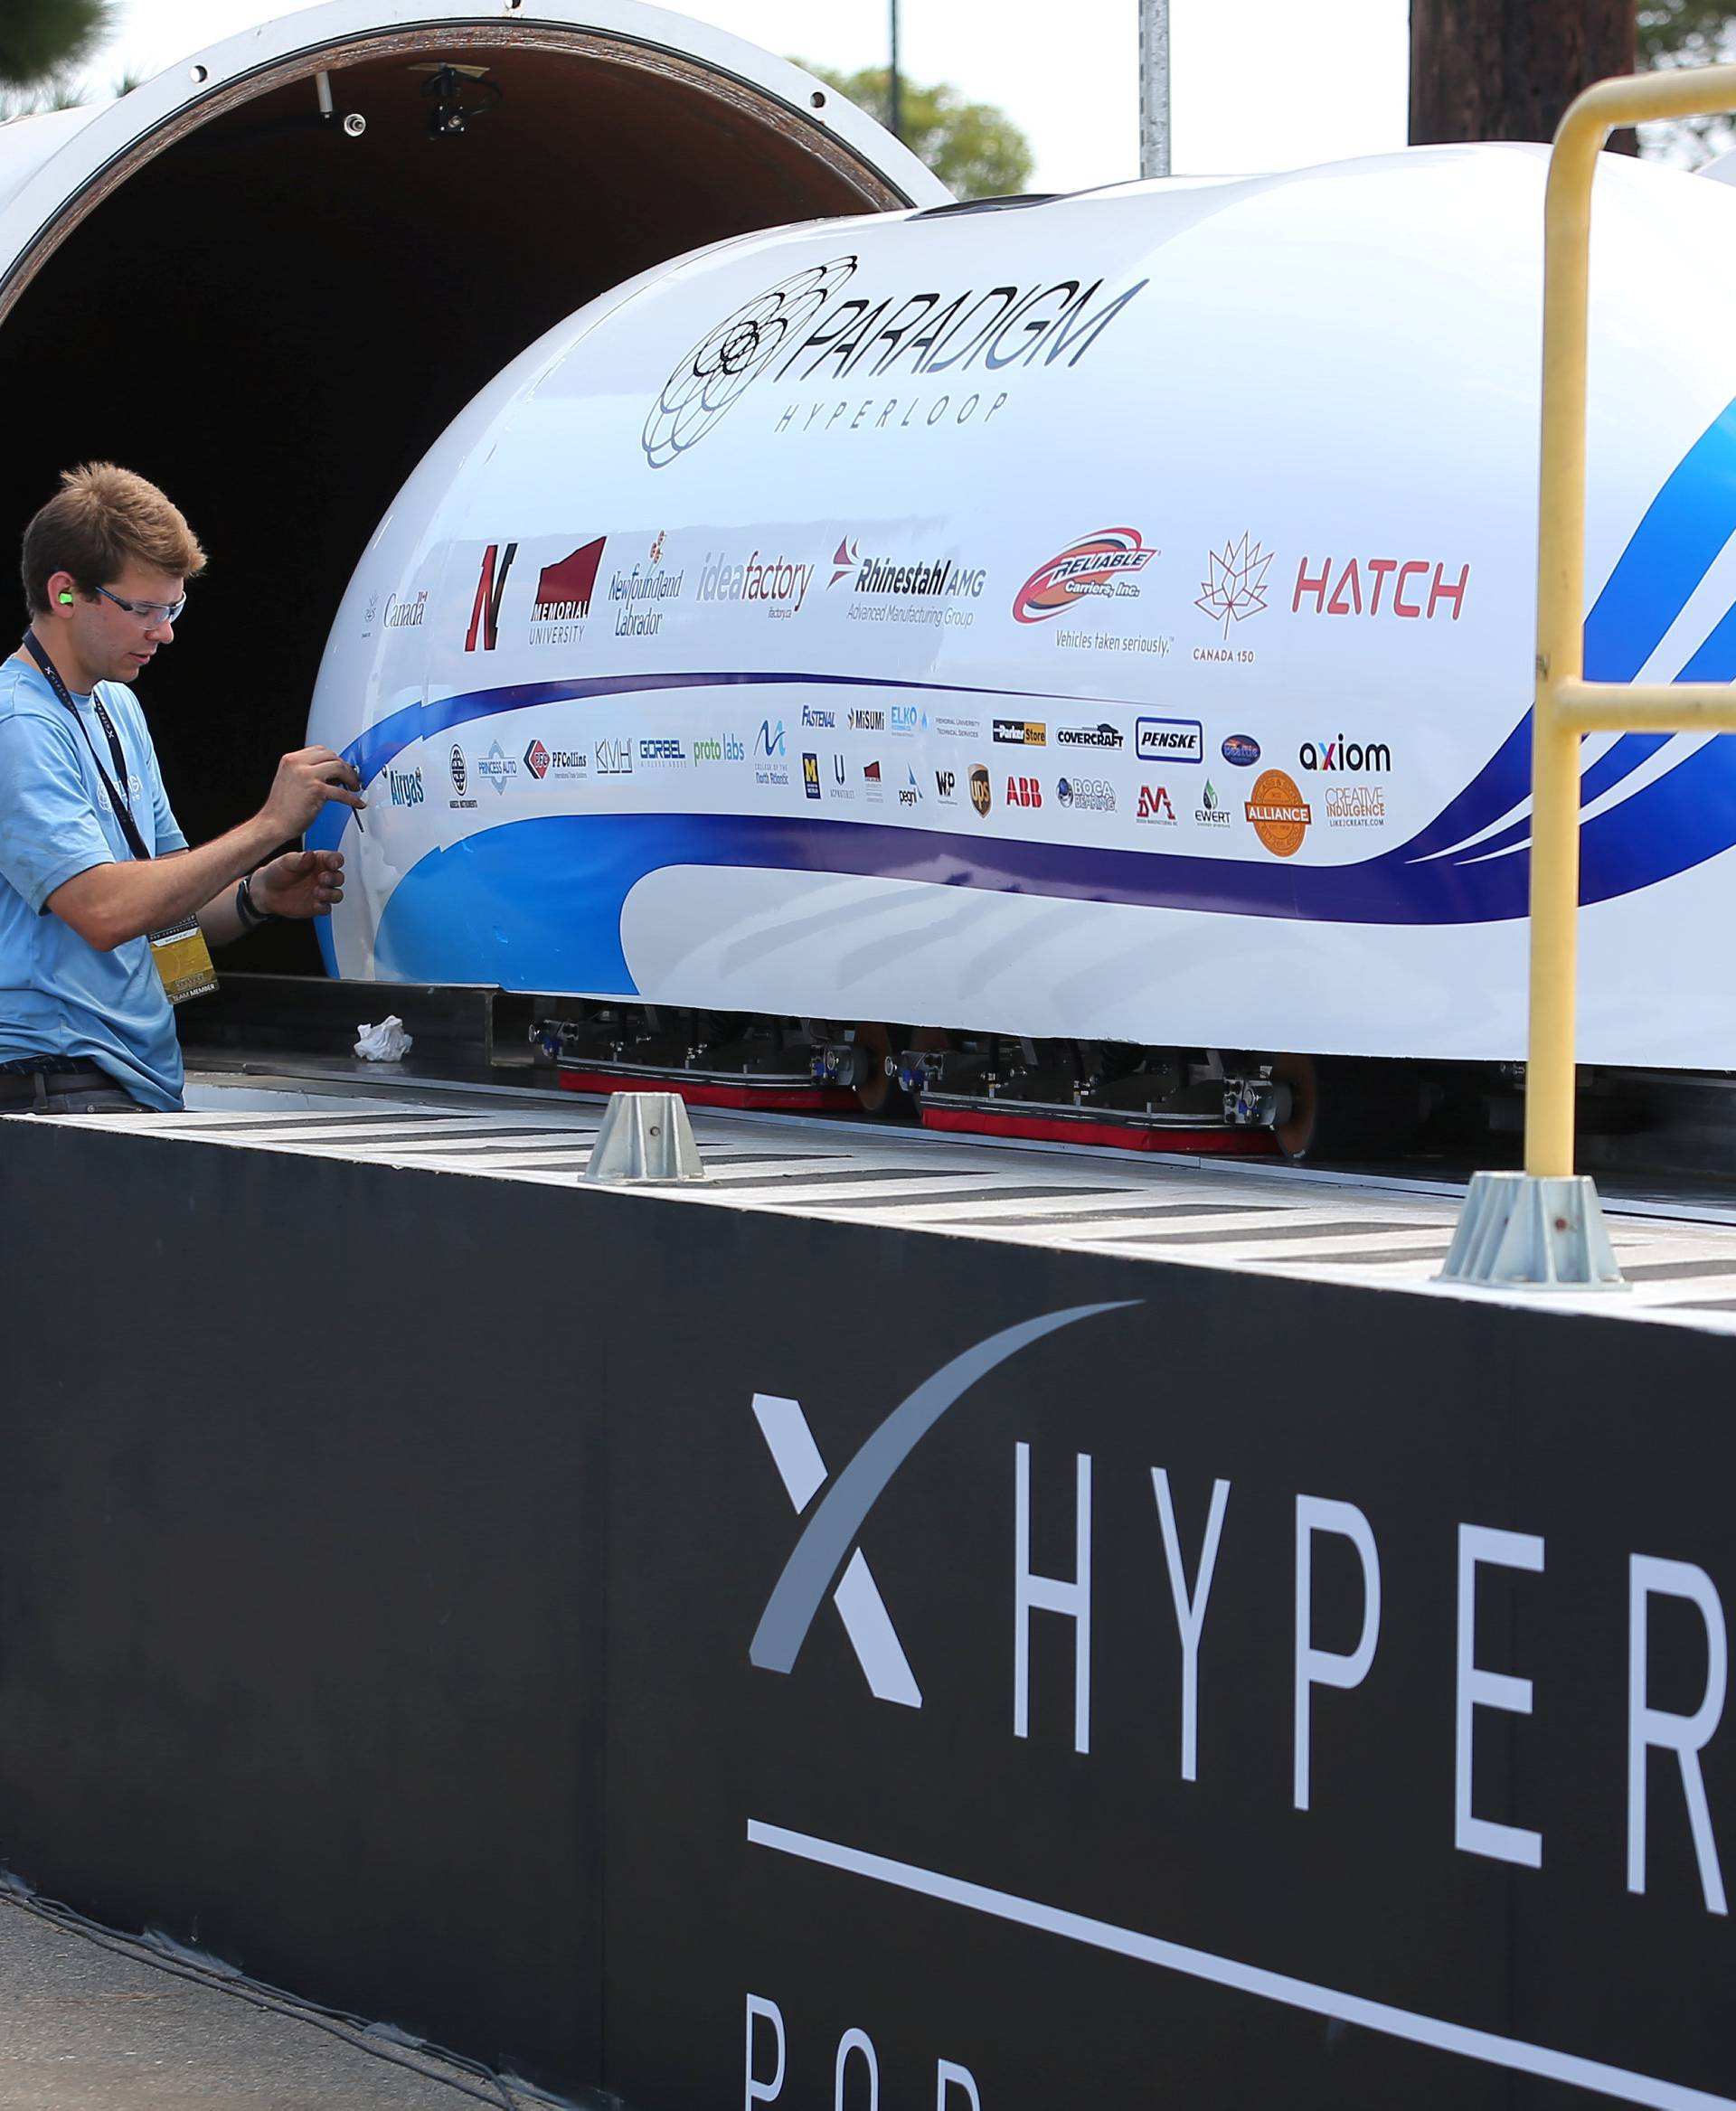 Paradigm Hyperloop team from Memorial University in Newfoundland, Canada prepare to run their hyperpod at SpaceX's Hyperloop Pod Competition II in Hawthorne